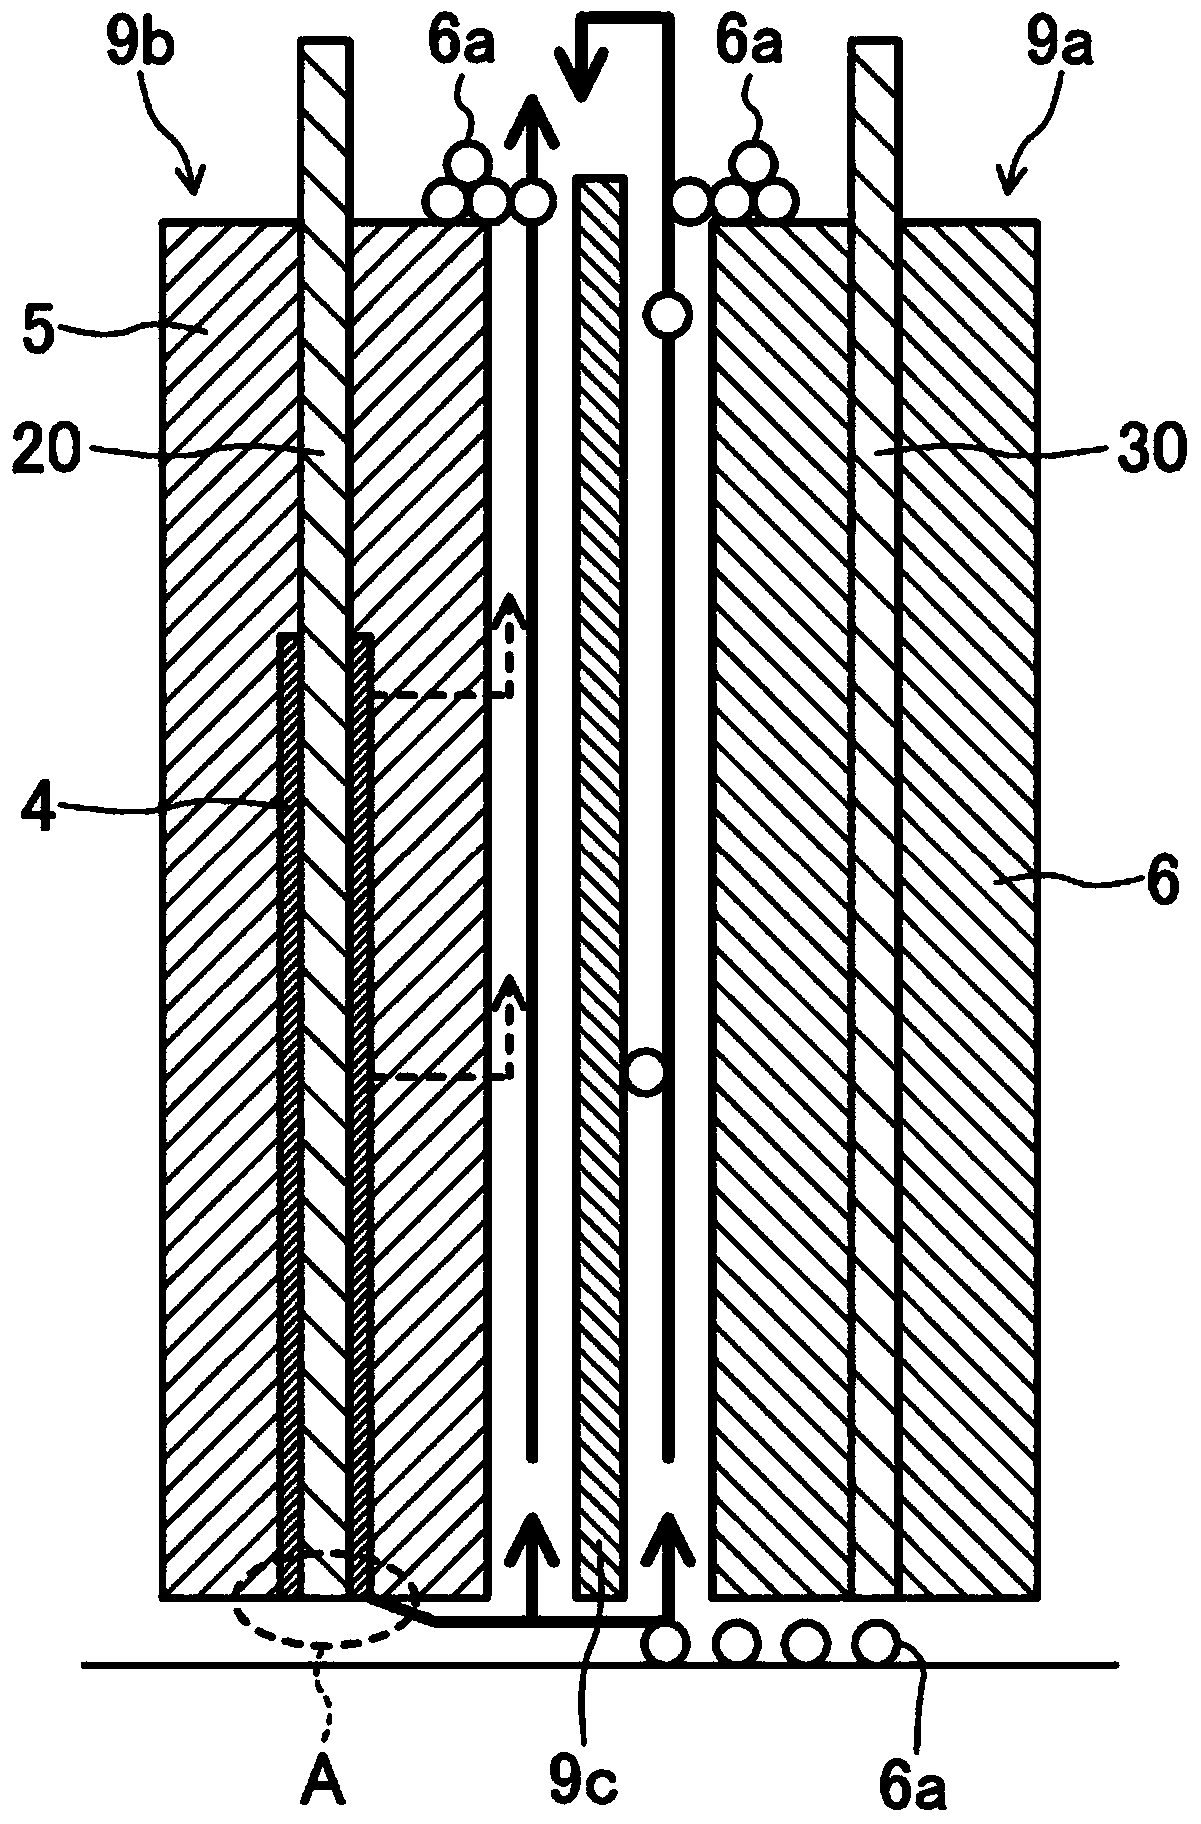 Lead-acid battery anode and lead-acid battery